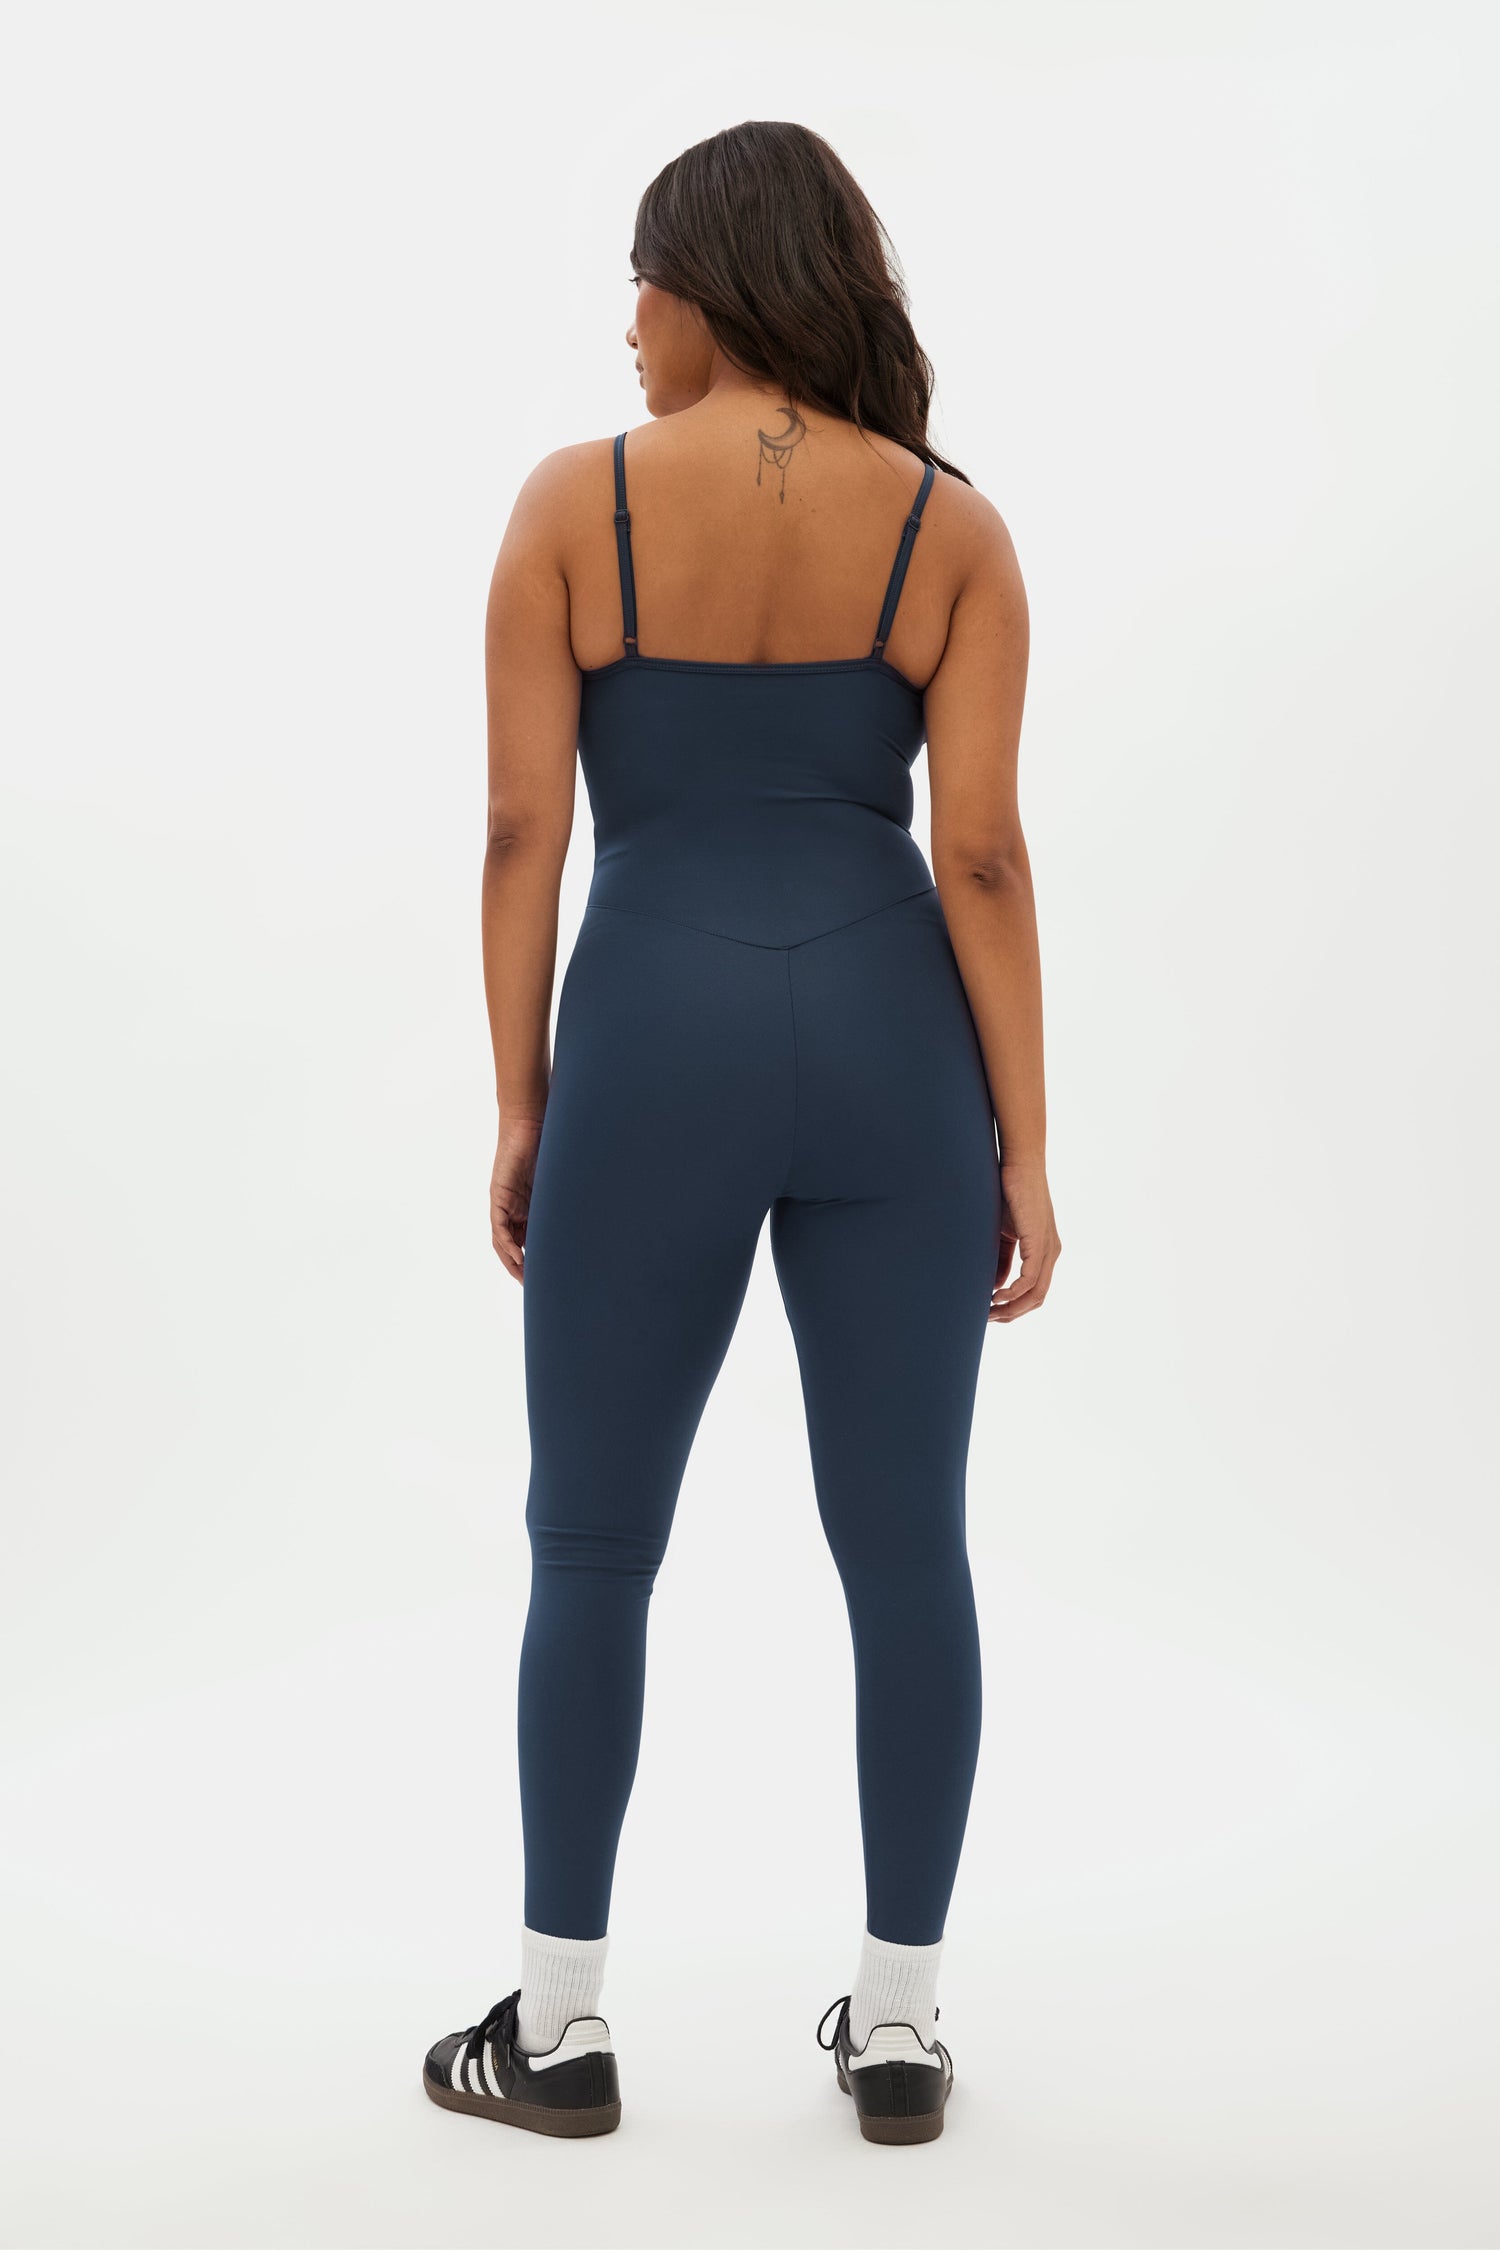 Girlfriend Collective Training & Yoga Unitard - Made from recycled plastic bottles Midnight Onepieces